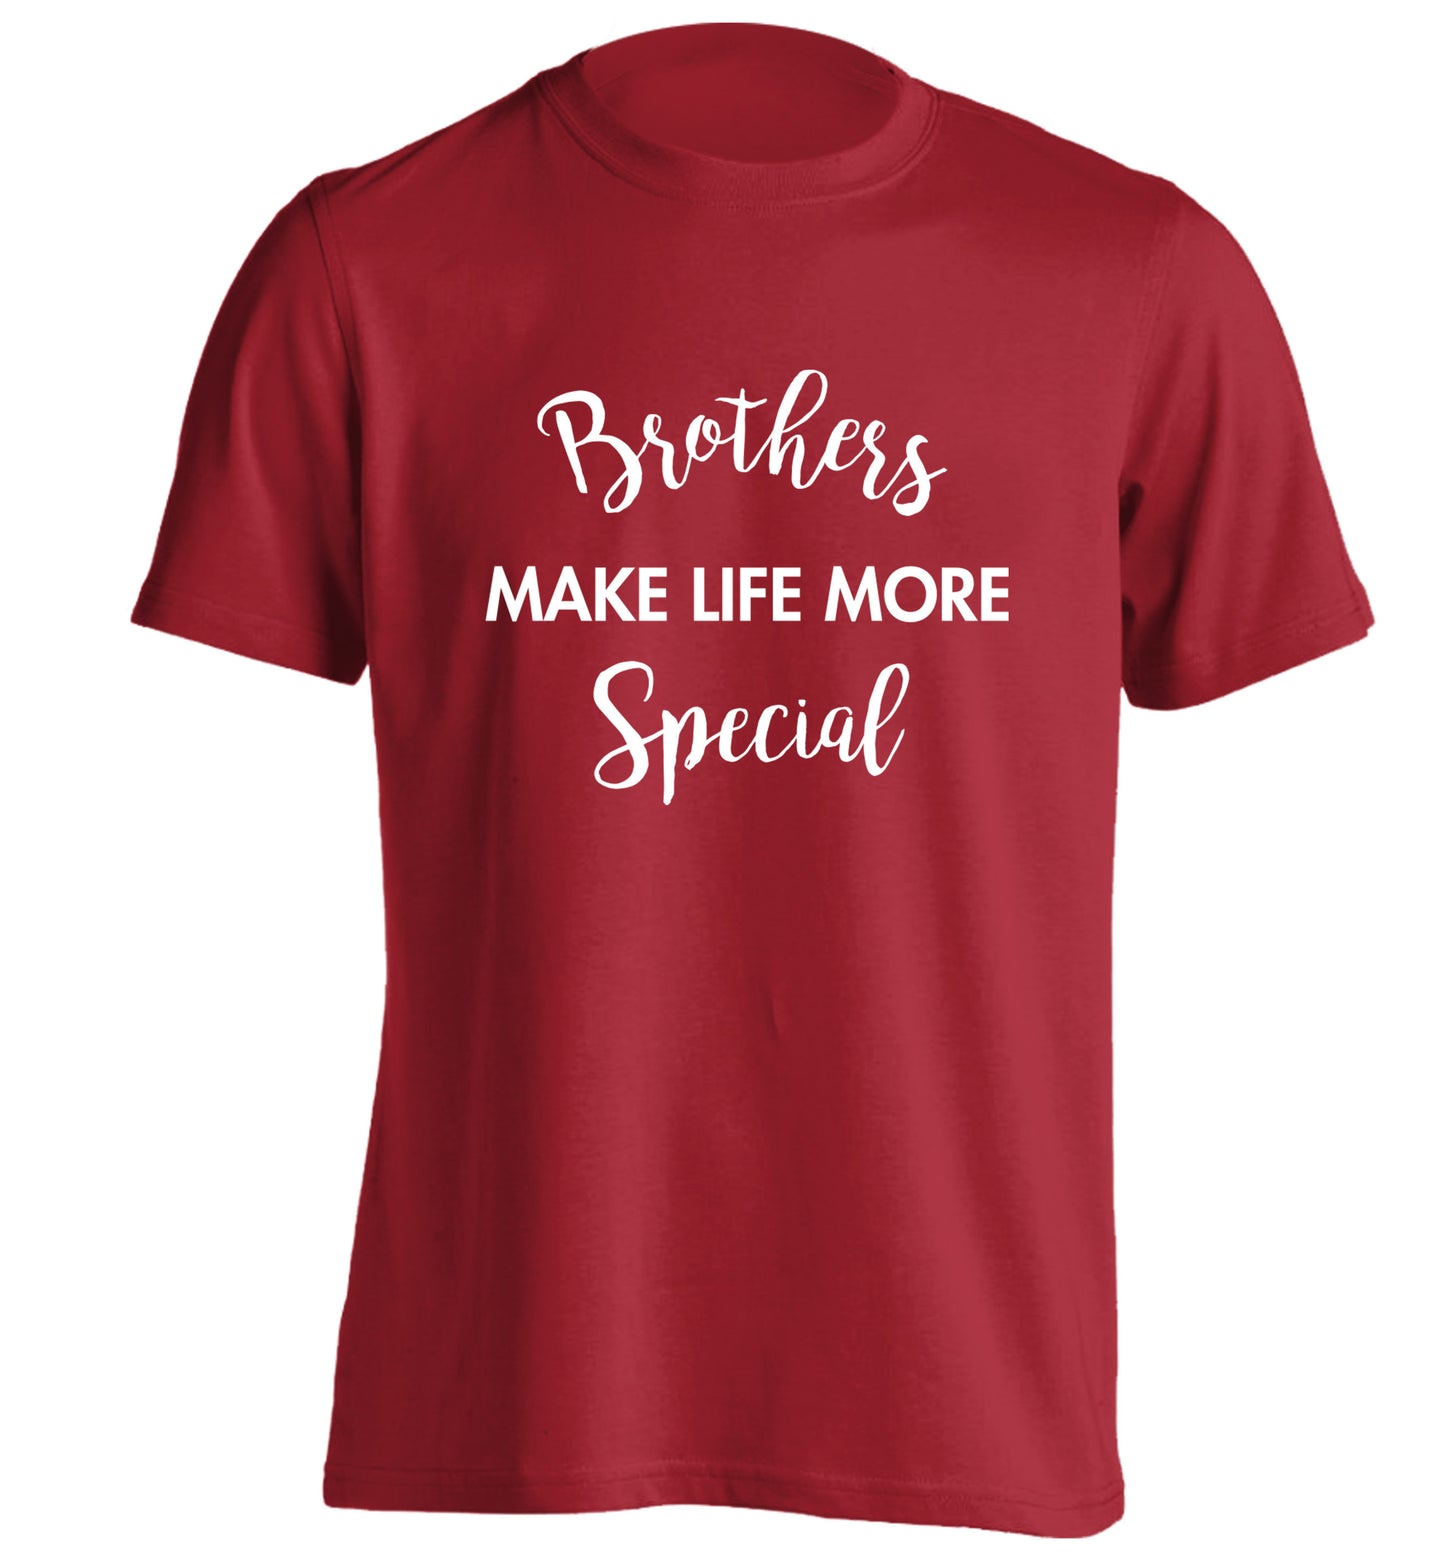 Brothers make life more special adults unisex red Tshirt 2XL